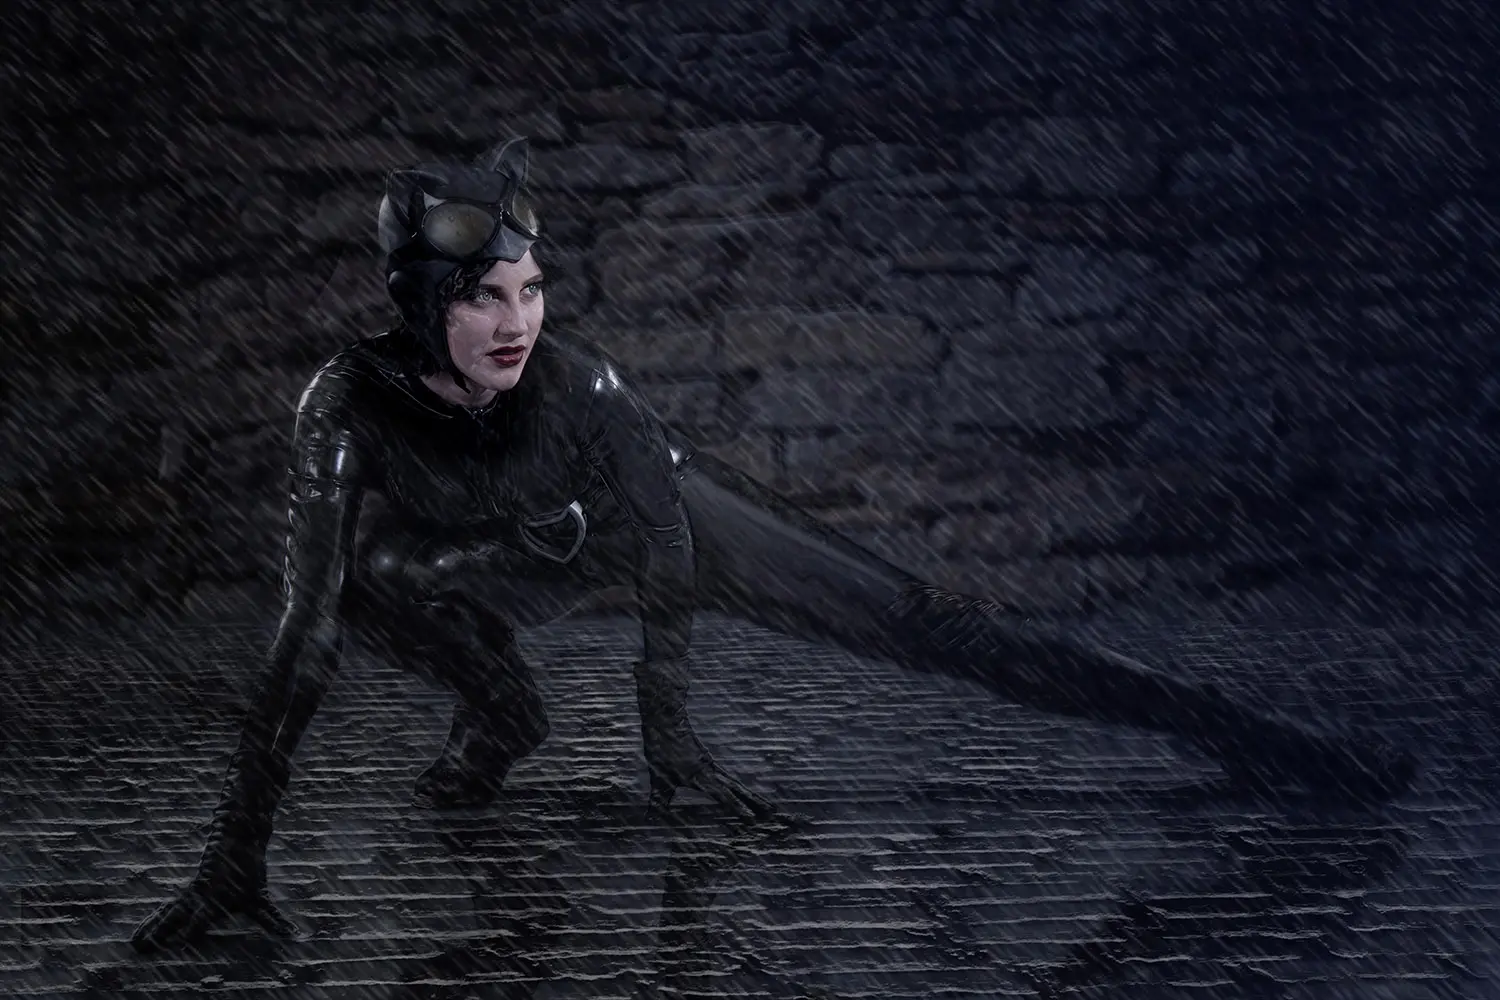 Cosplay catwoman in PVC suit on cobbled street in the rain